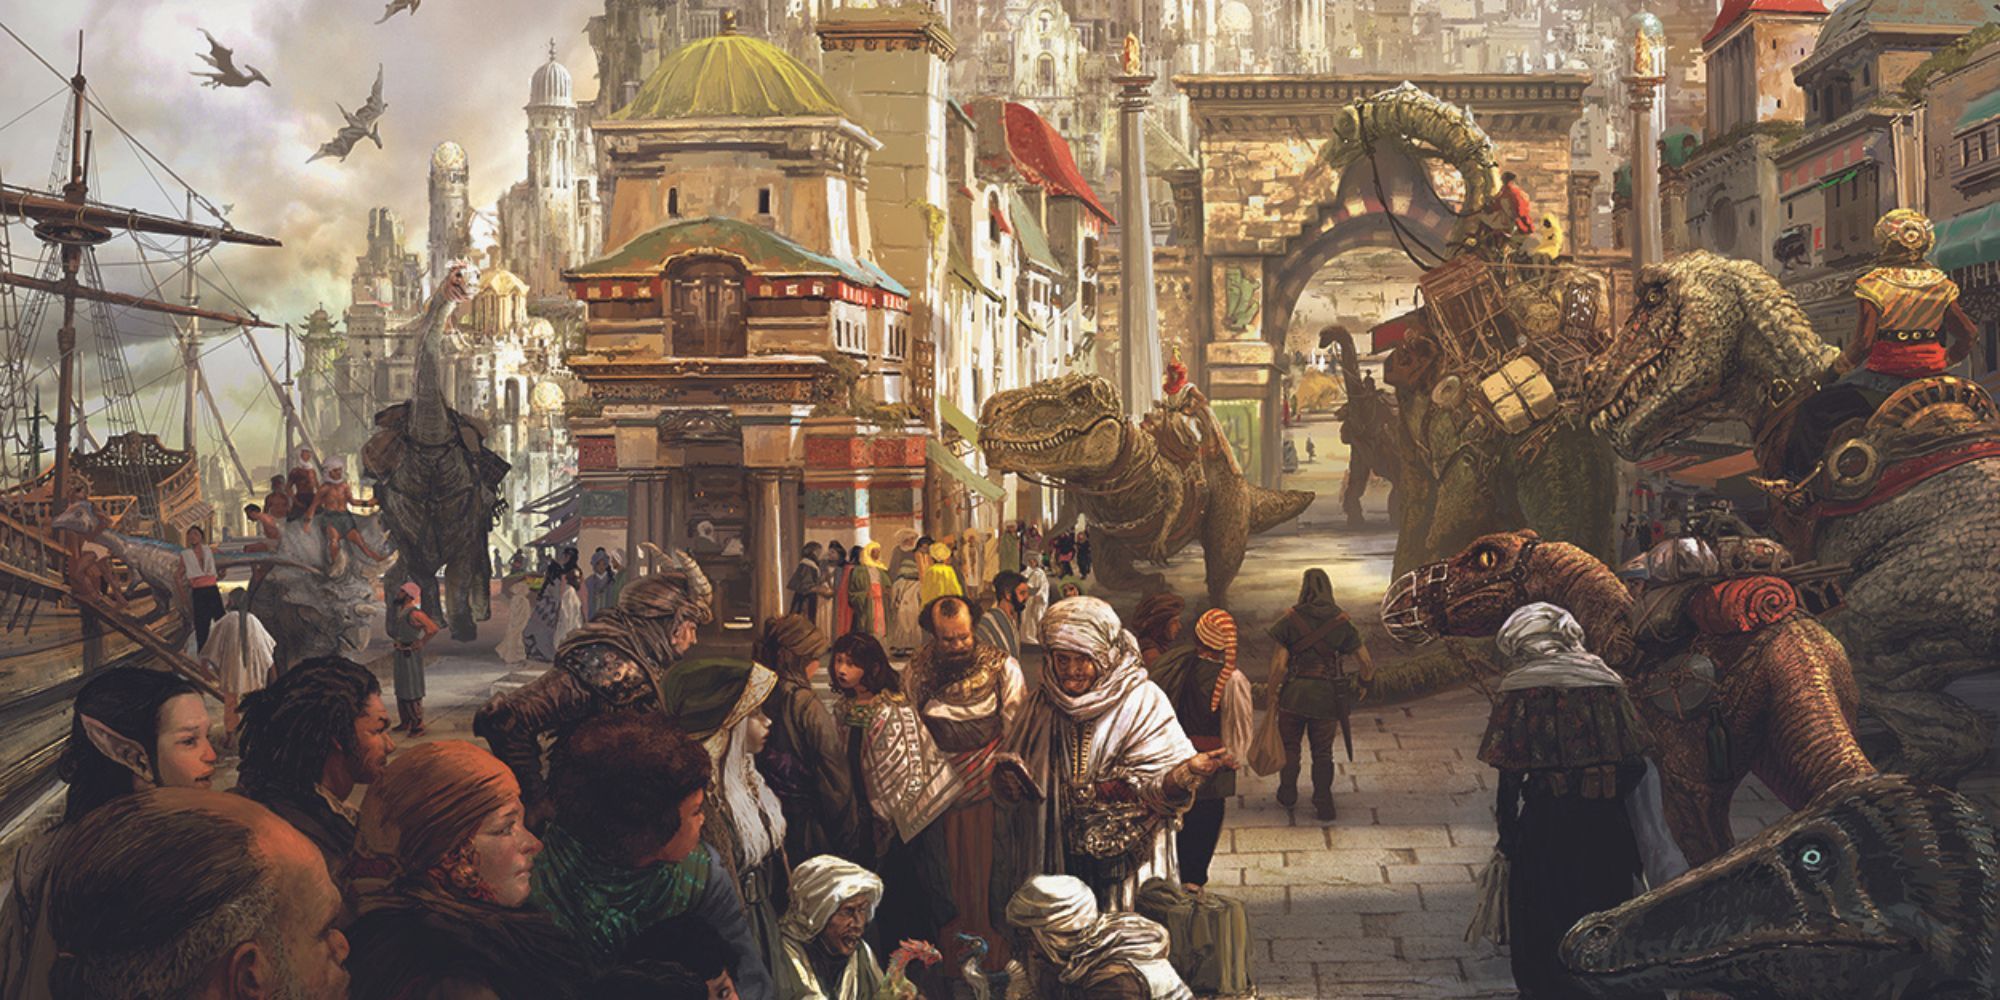 Dungeons and Dragons Busy City Street